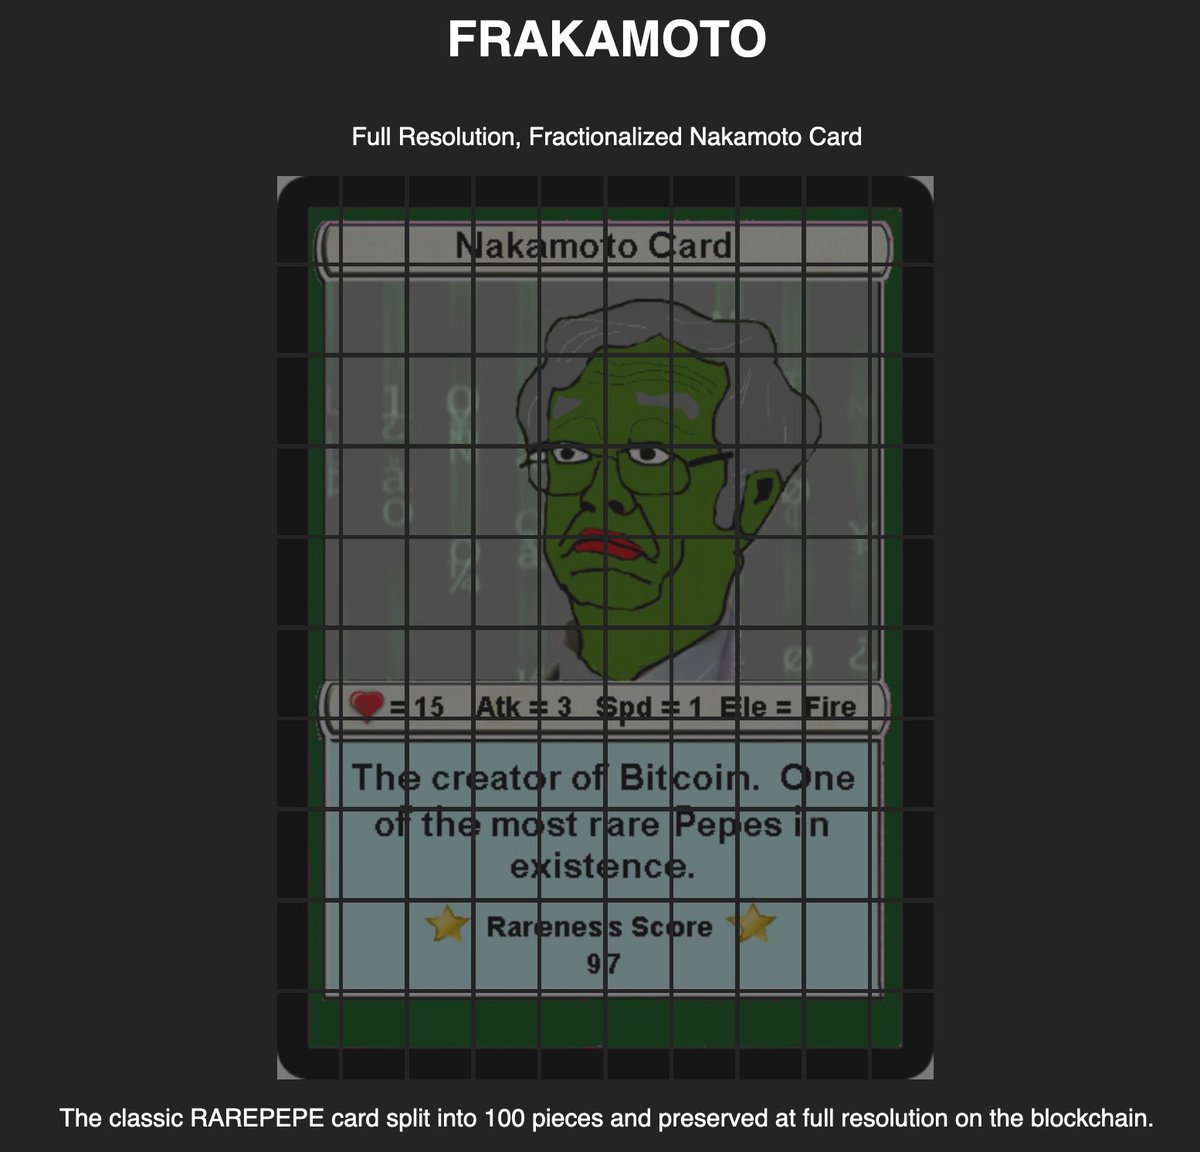 Finally! RAREPEPE has been preserved in the UTXO set forever. 100 individual image slices stamped on the blockchain. A monumental effort!

FRAKAMOTO.COM #BitcoinStamps